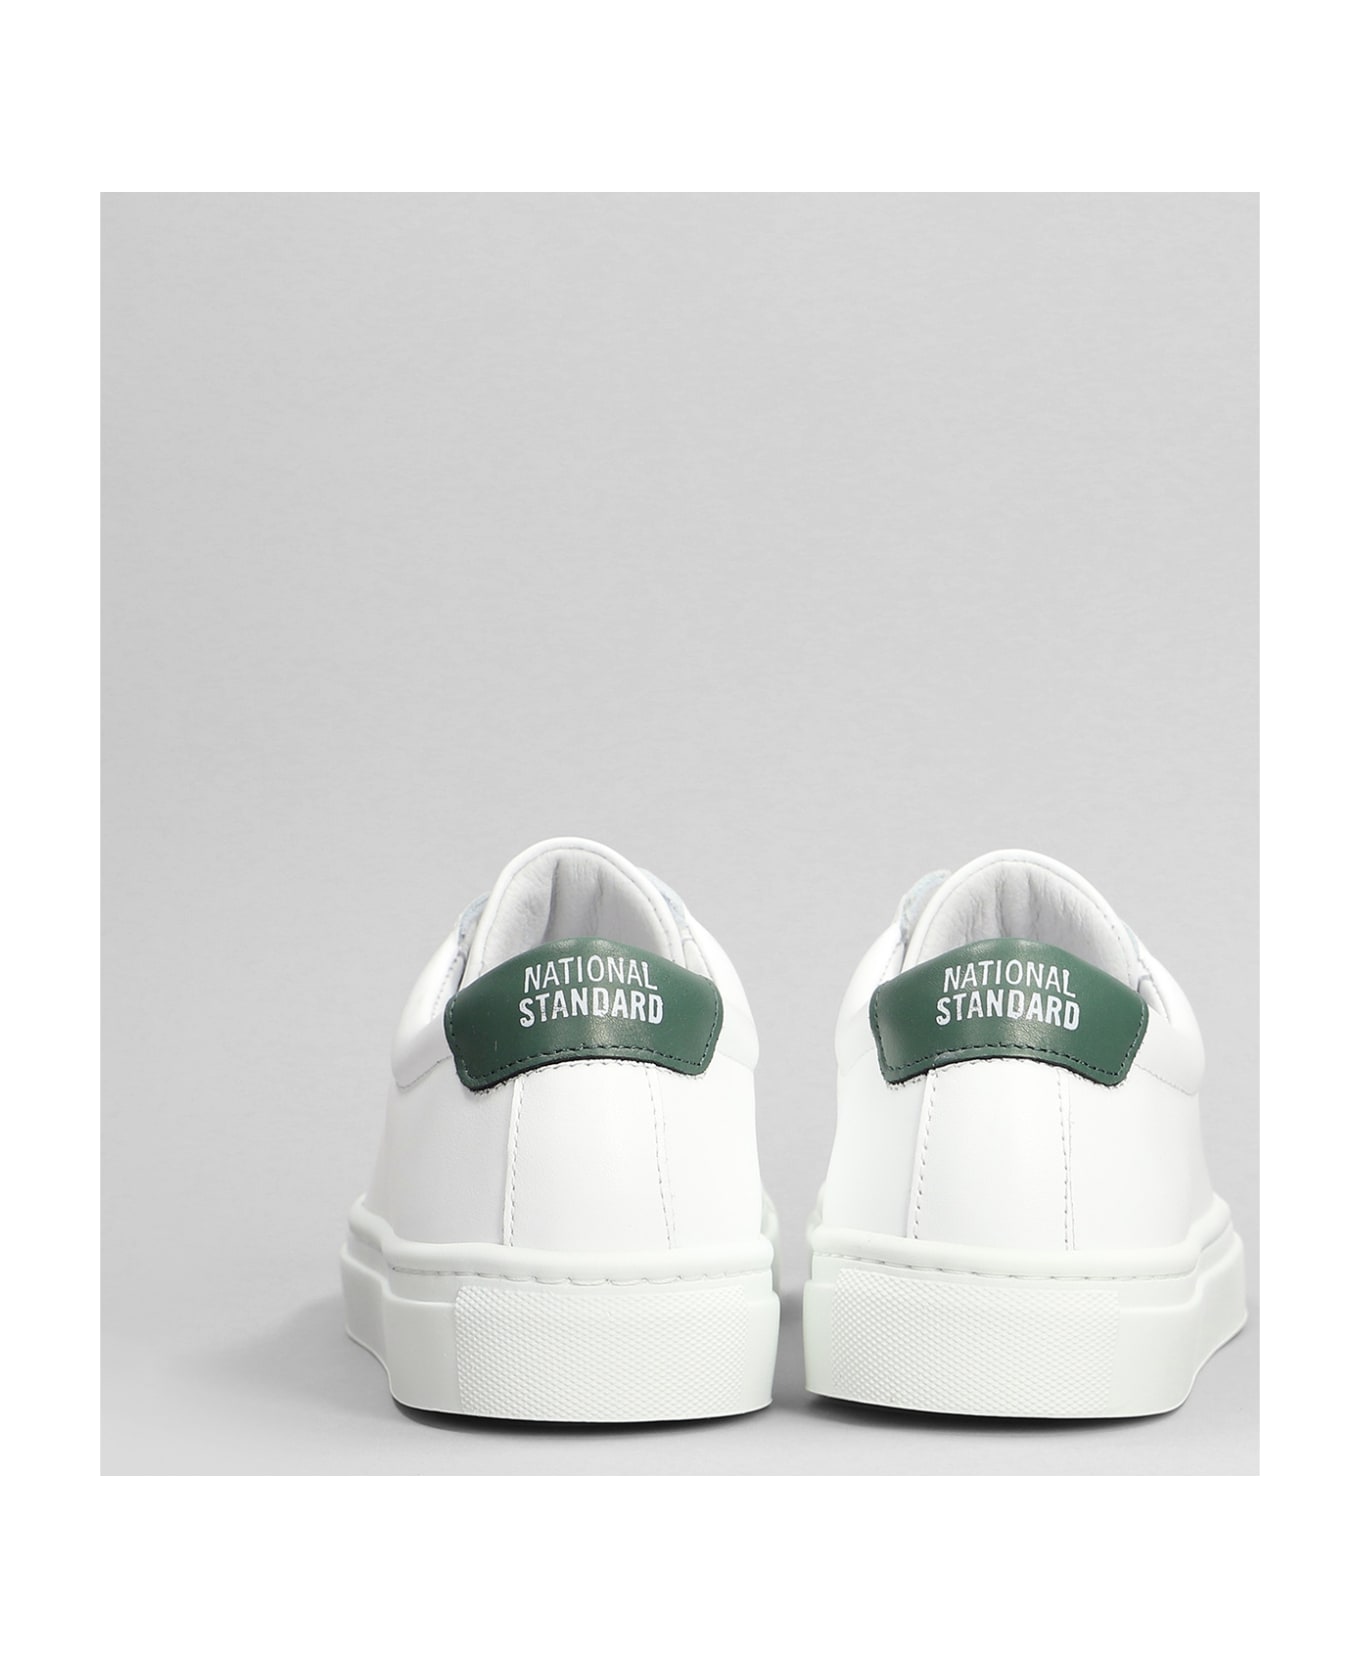 National Standard Edition 3 Low Sneakers In White Leather - white